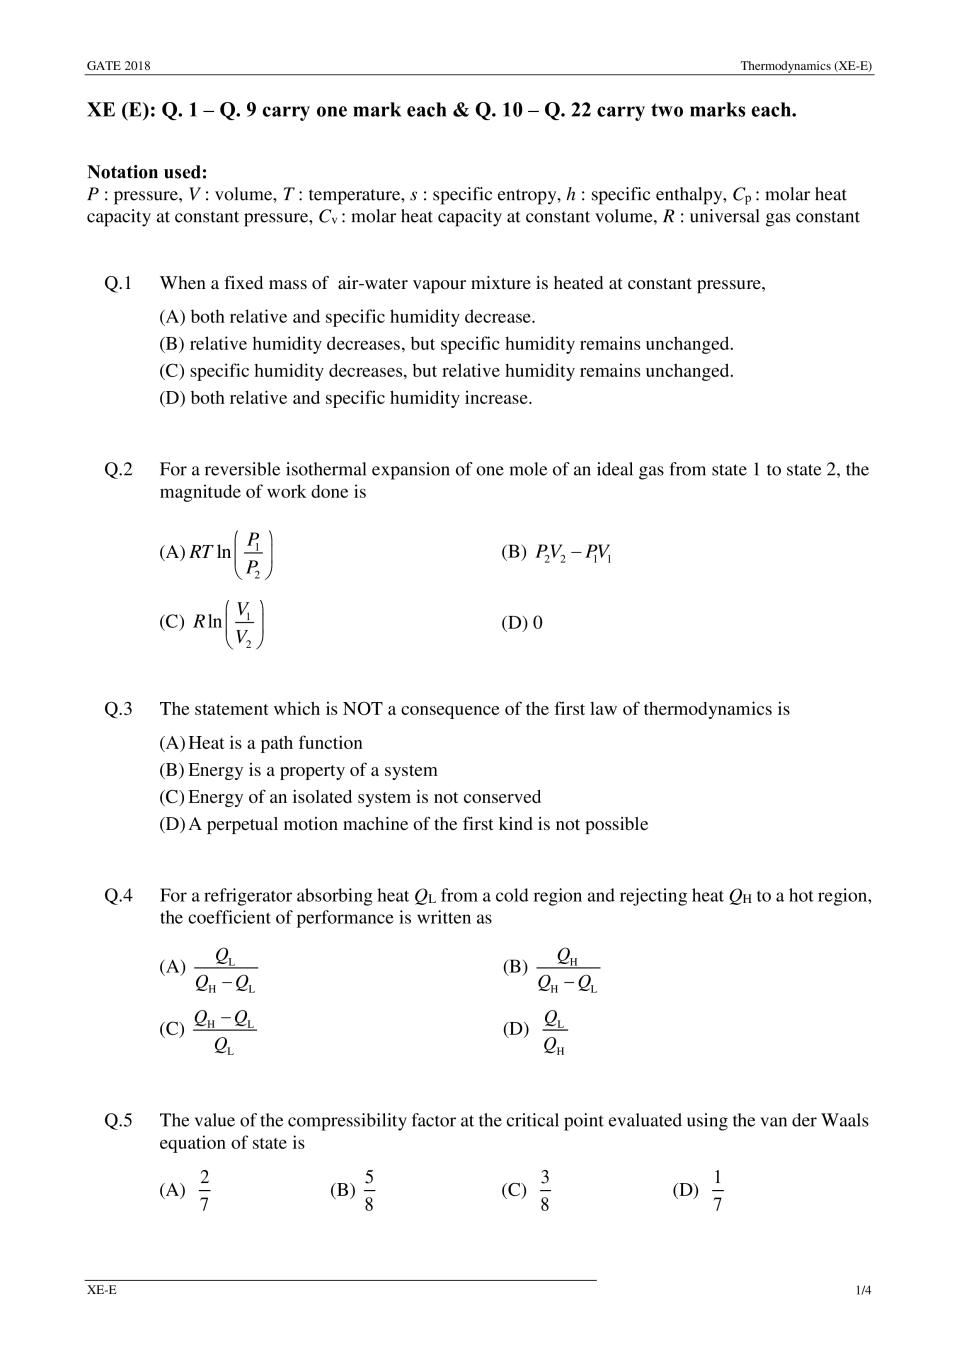 GATE 2018 Thermodynamics (XE-E) Question Paper with Answer - Page 1